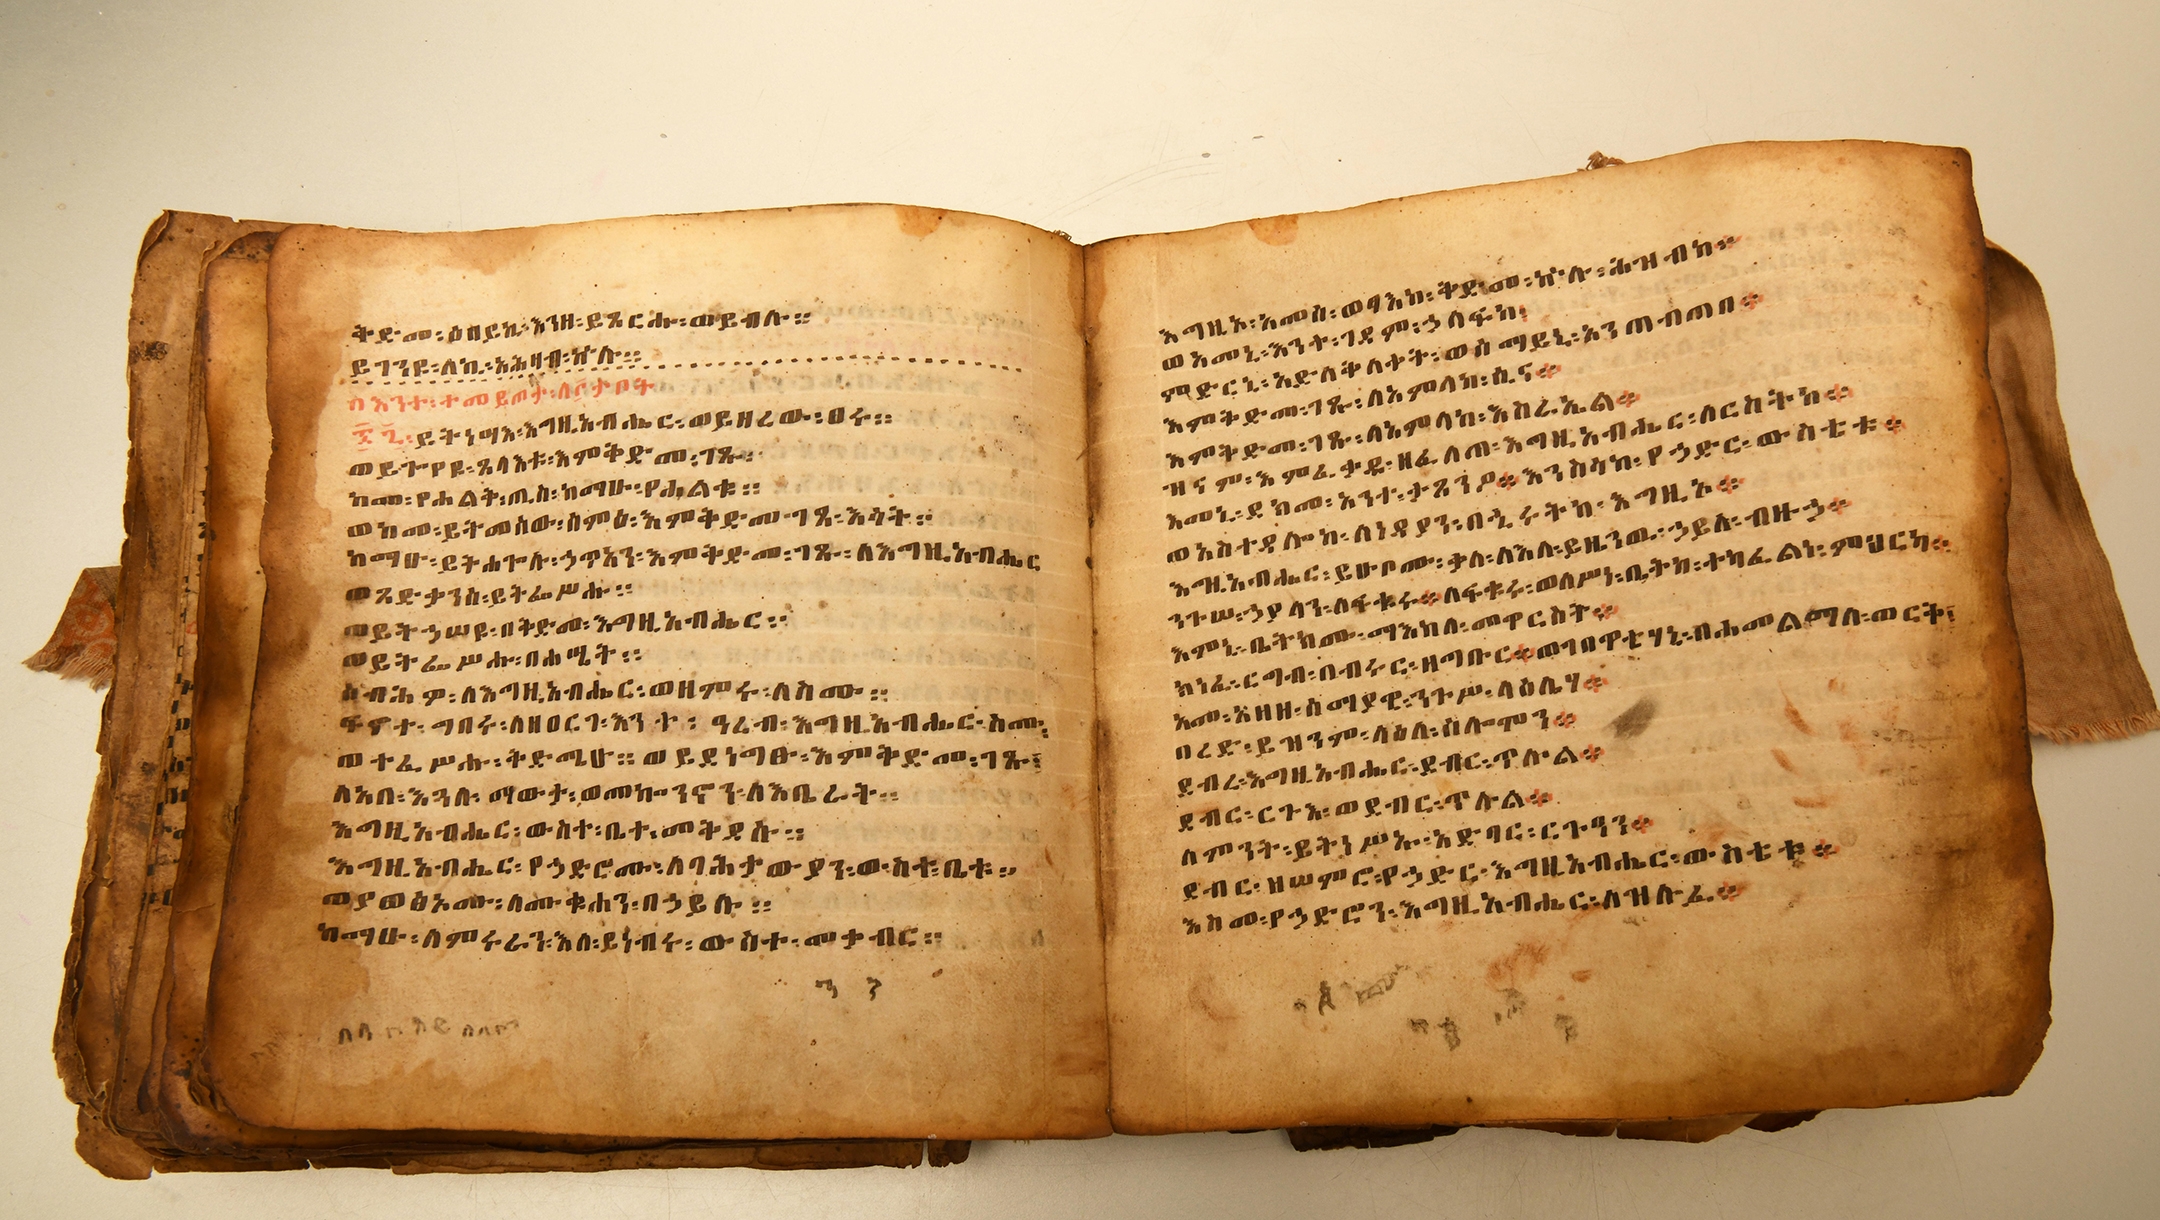 A view of the Orit book that Ayanawo Ferada Senebato and his family retrieved in Ethiopia and smuggled to Israel in February 2022. (Yossi Zeliger)